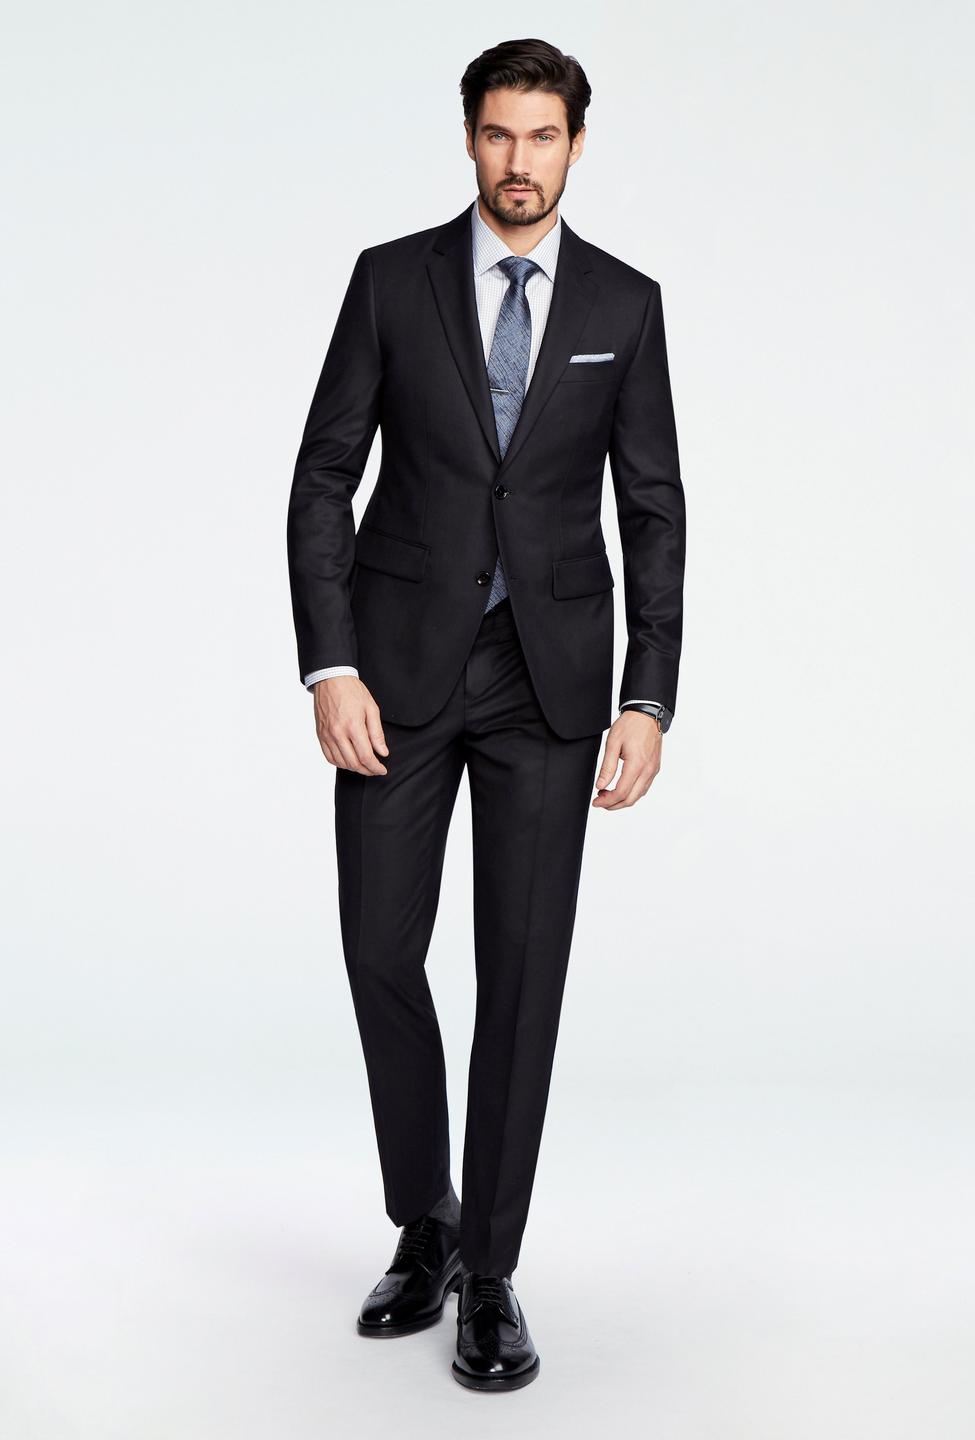 Black suit - Solid Design from Luxury Indochino Collection